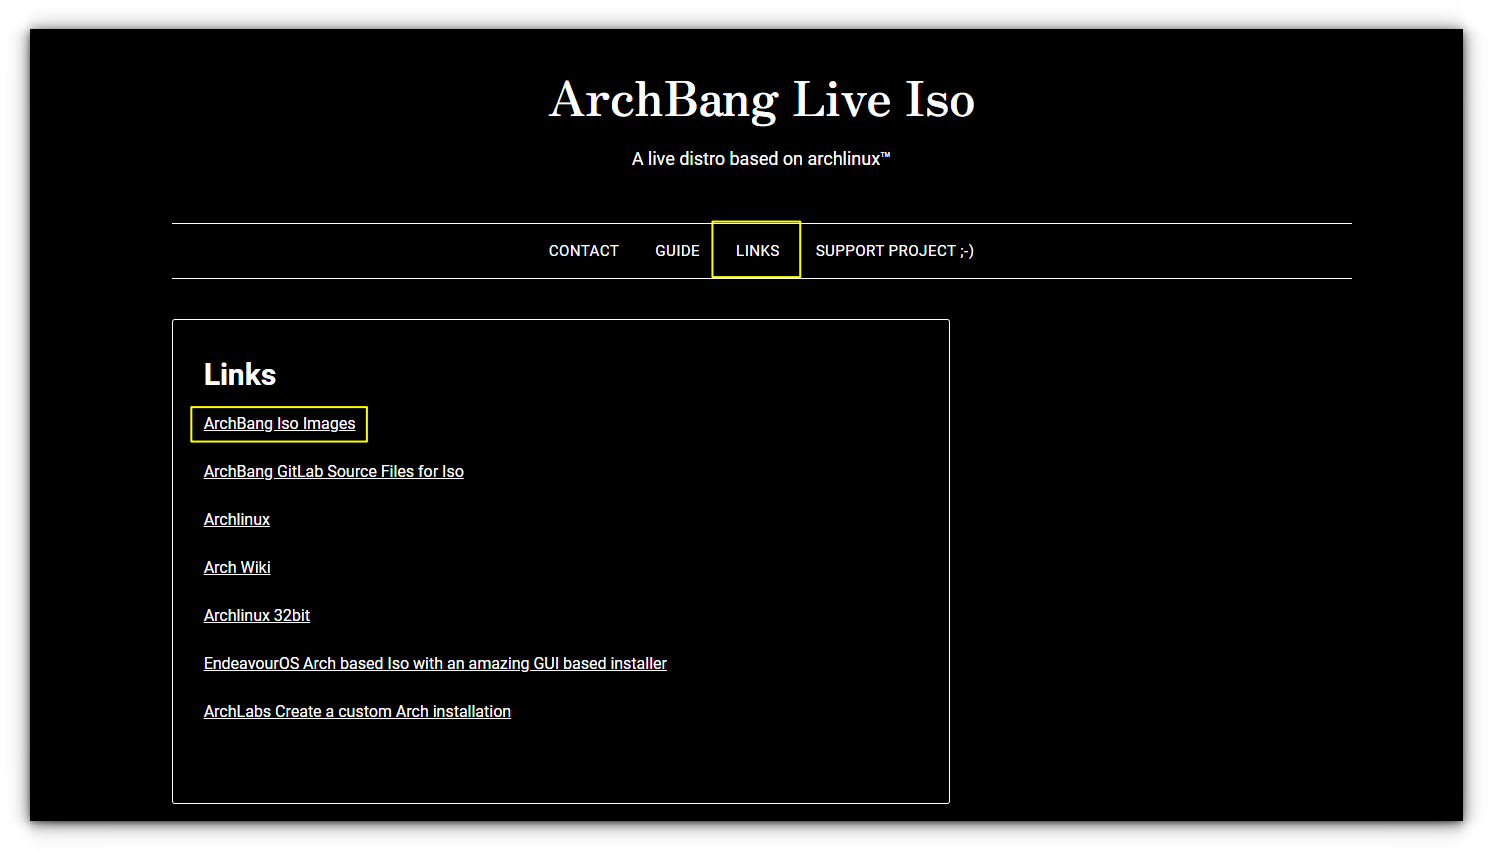 go to archbang iso images to download the iso file from sourceforge